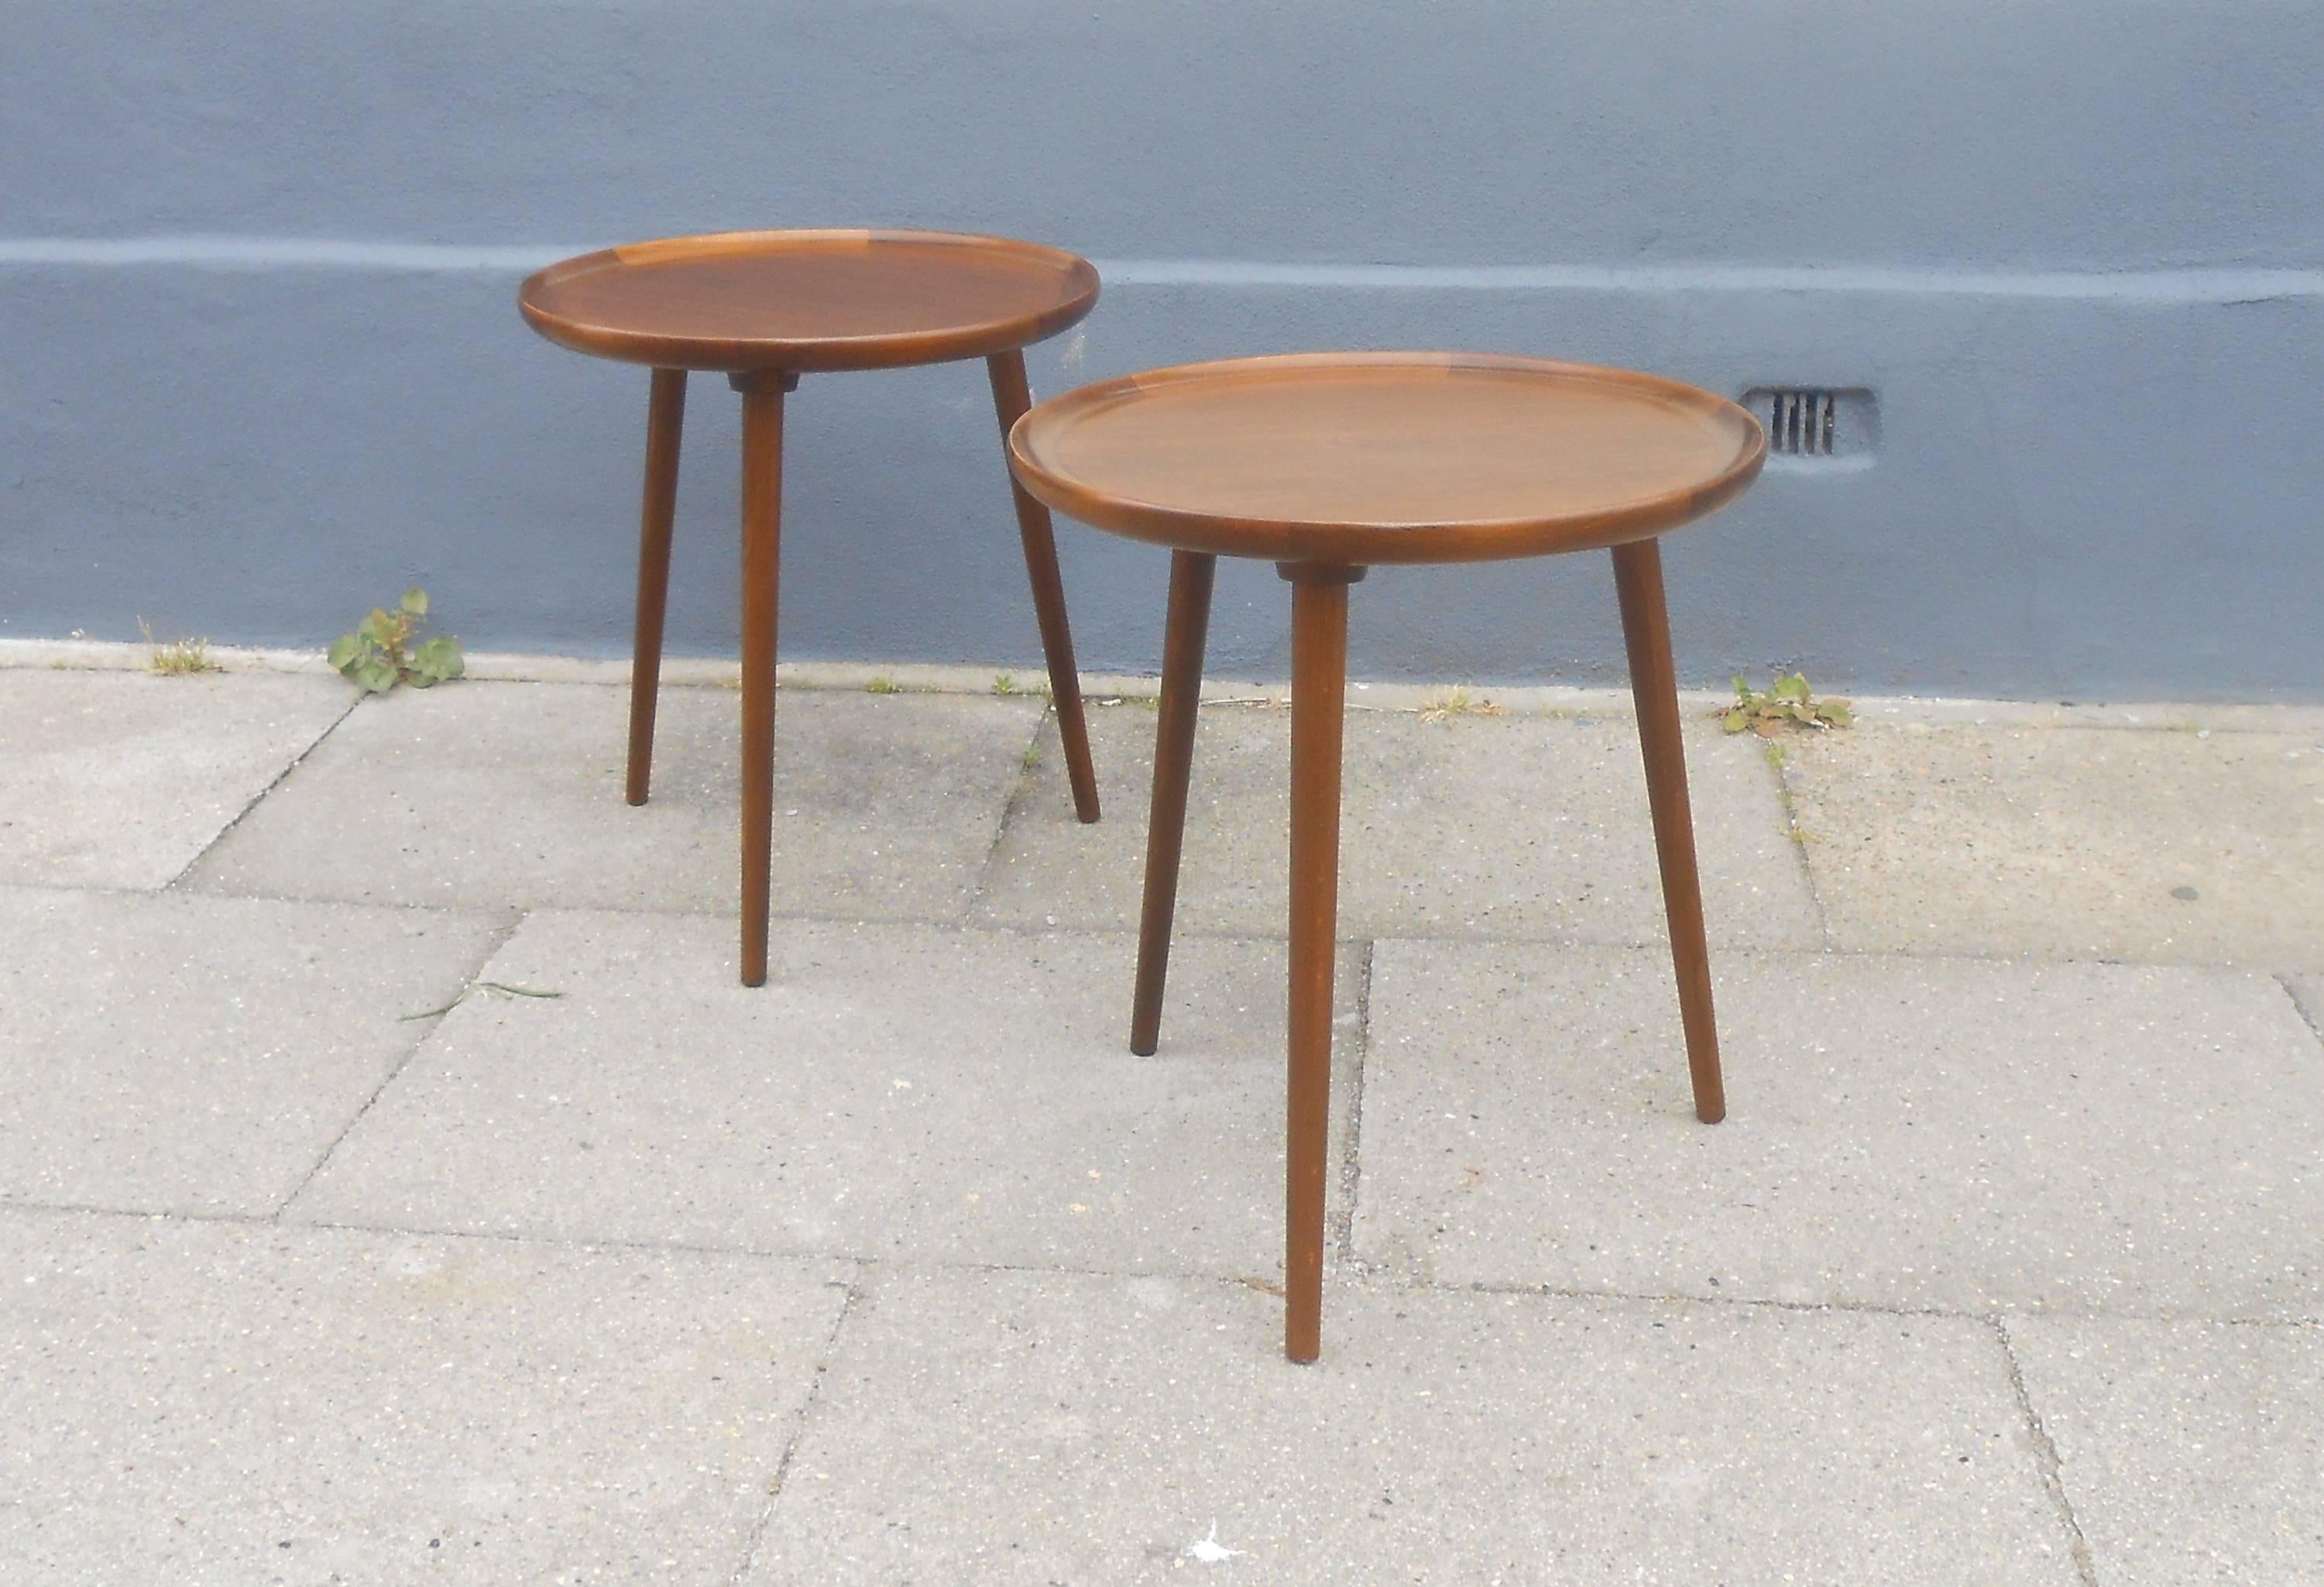 Matching pair of side tables or small coffee tables by Anton Kildeberg. Model nr: 200 in walnut. Manufactured 14/12-1967. Both tables with AK label to the backside. Measurements: H 18 inches (46 cm), D 16.5 inches (42 cm). The tables will be shipped